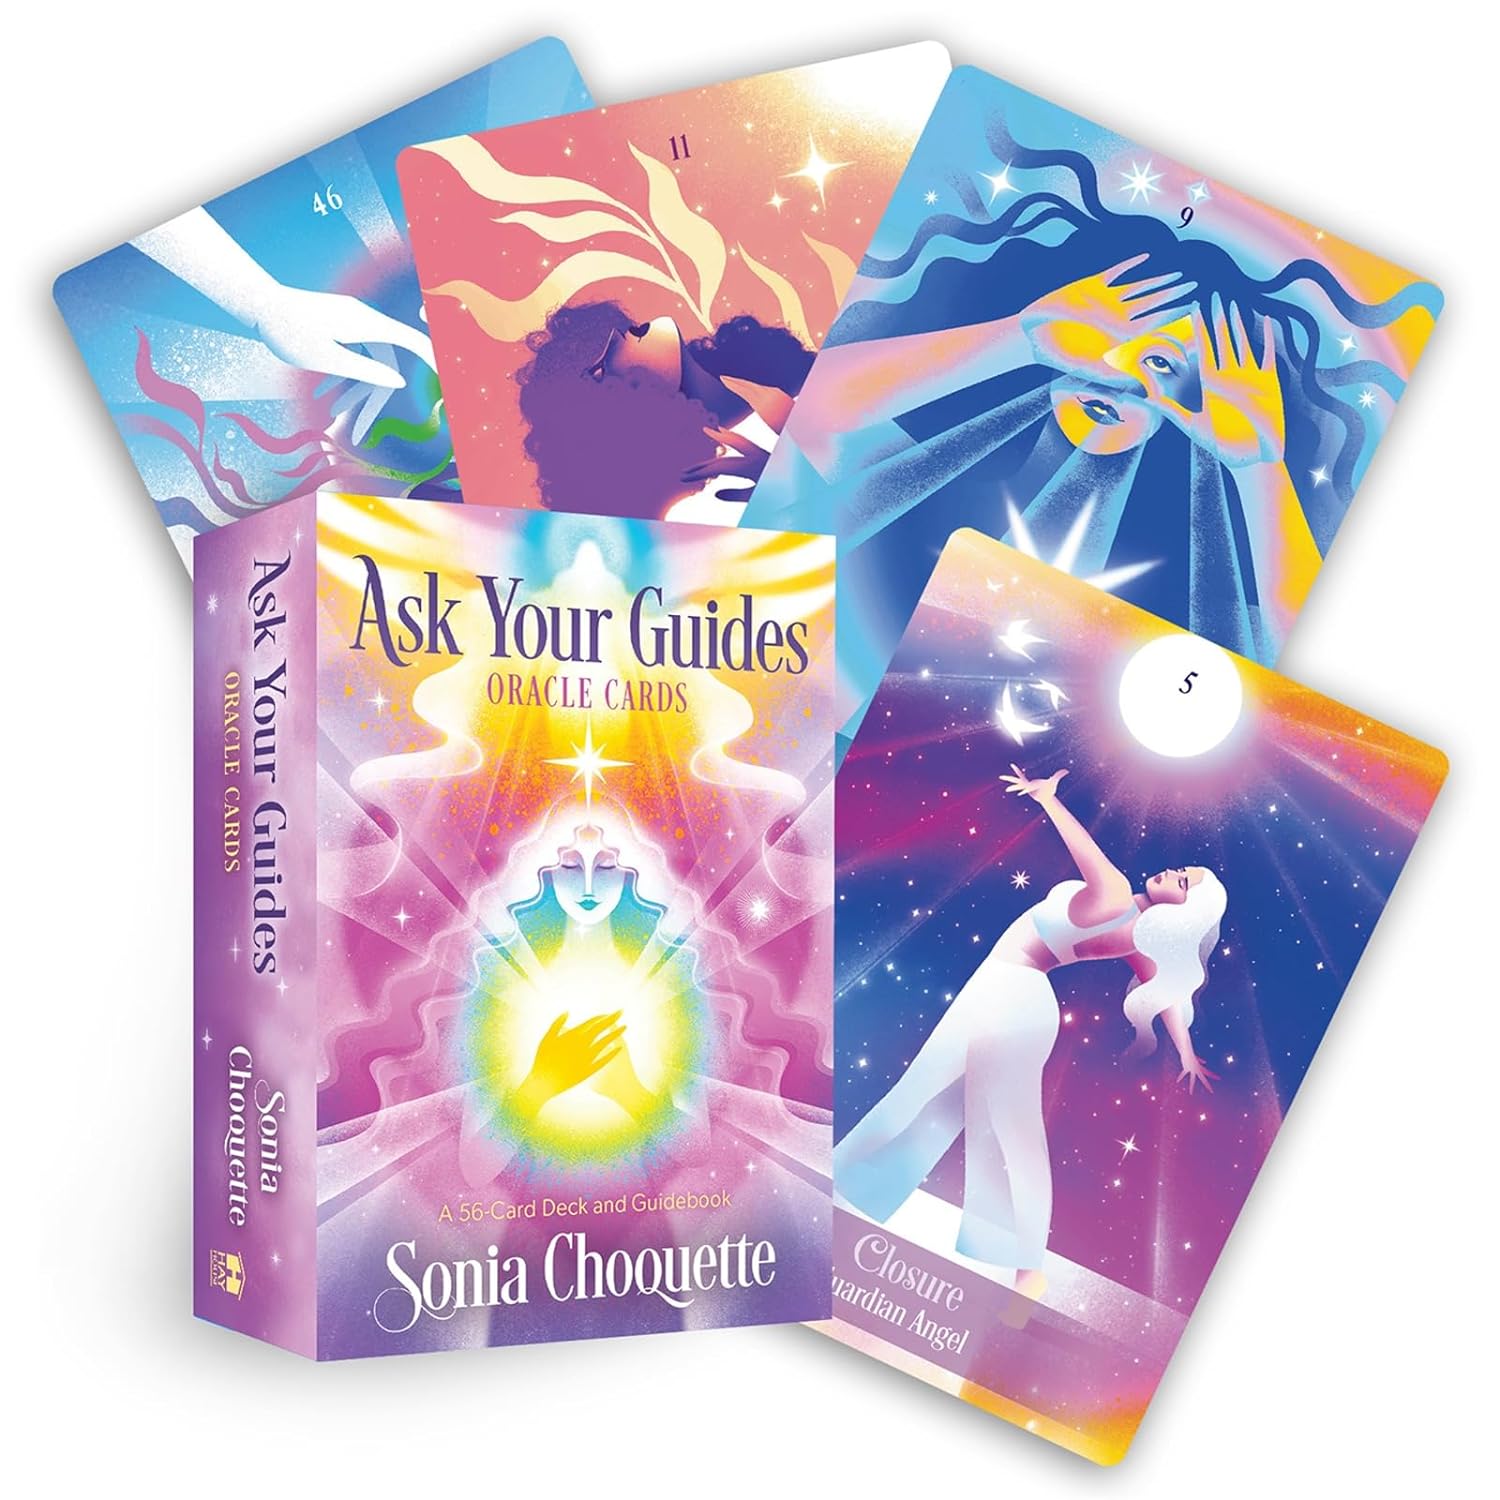 Ask Your Guides Oracle Cards & Guidebook || Sonia Choquette